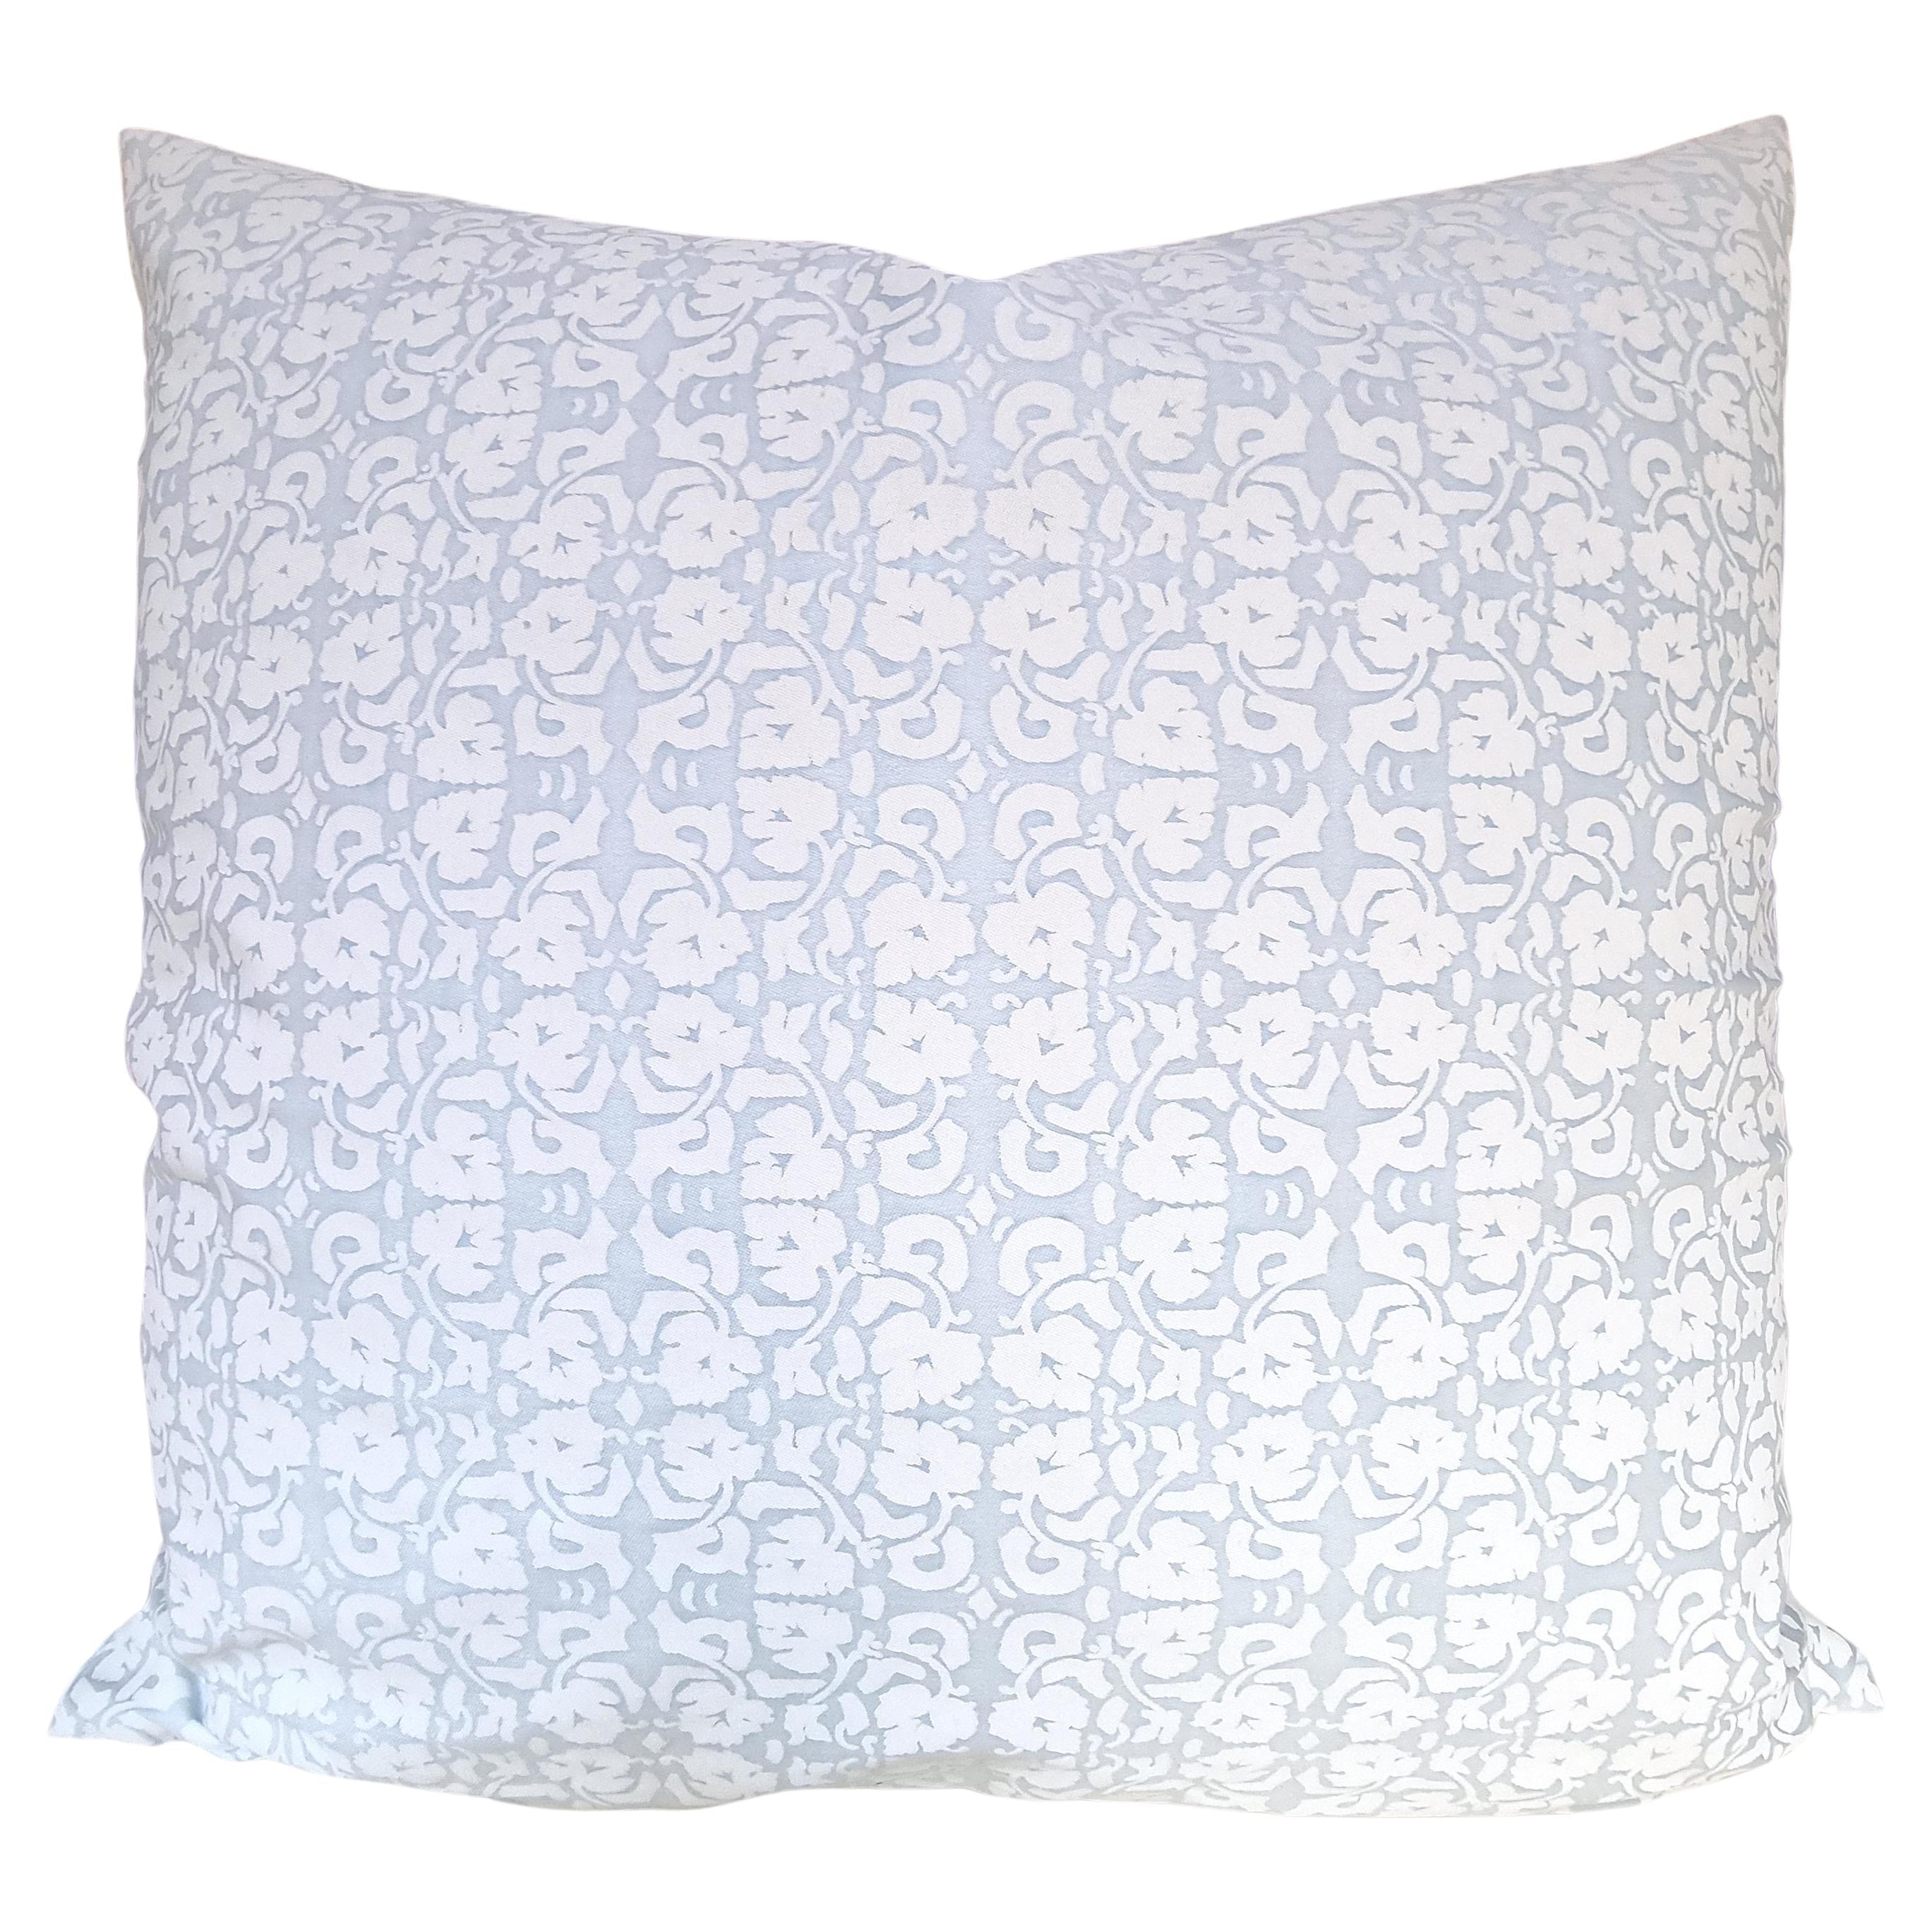 Double Sided Fortuny Fabric Throw Pillow Shiraz Powder Blue & White